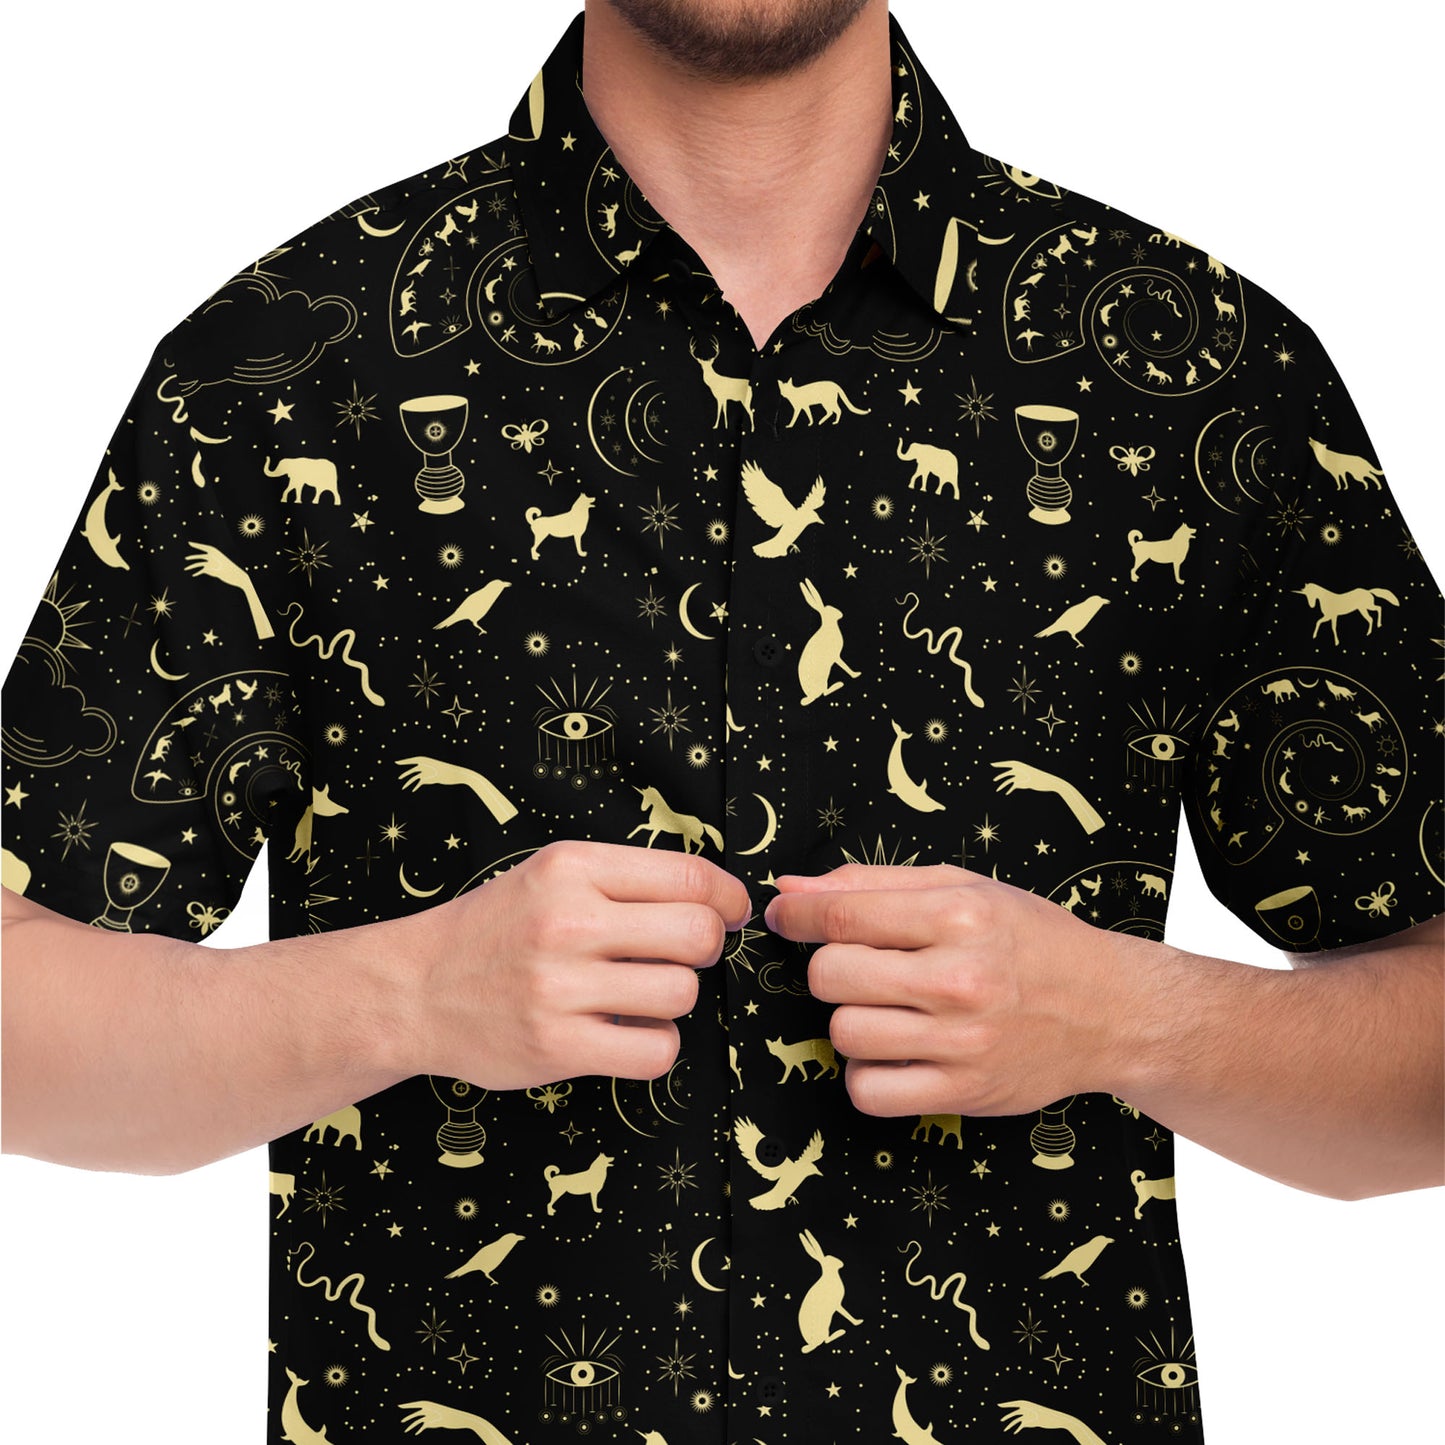 The magic is within us short sleeve button down shirt